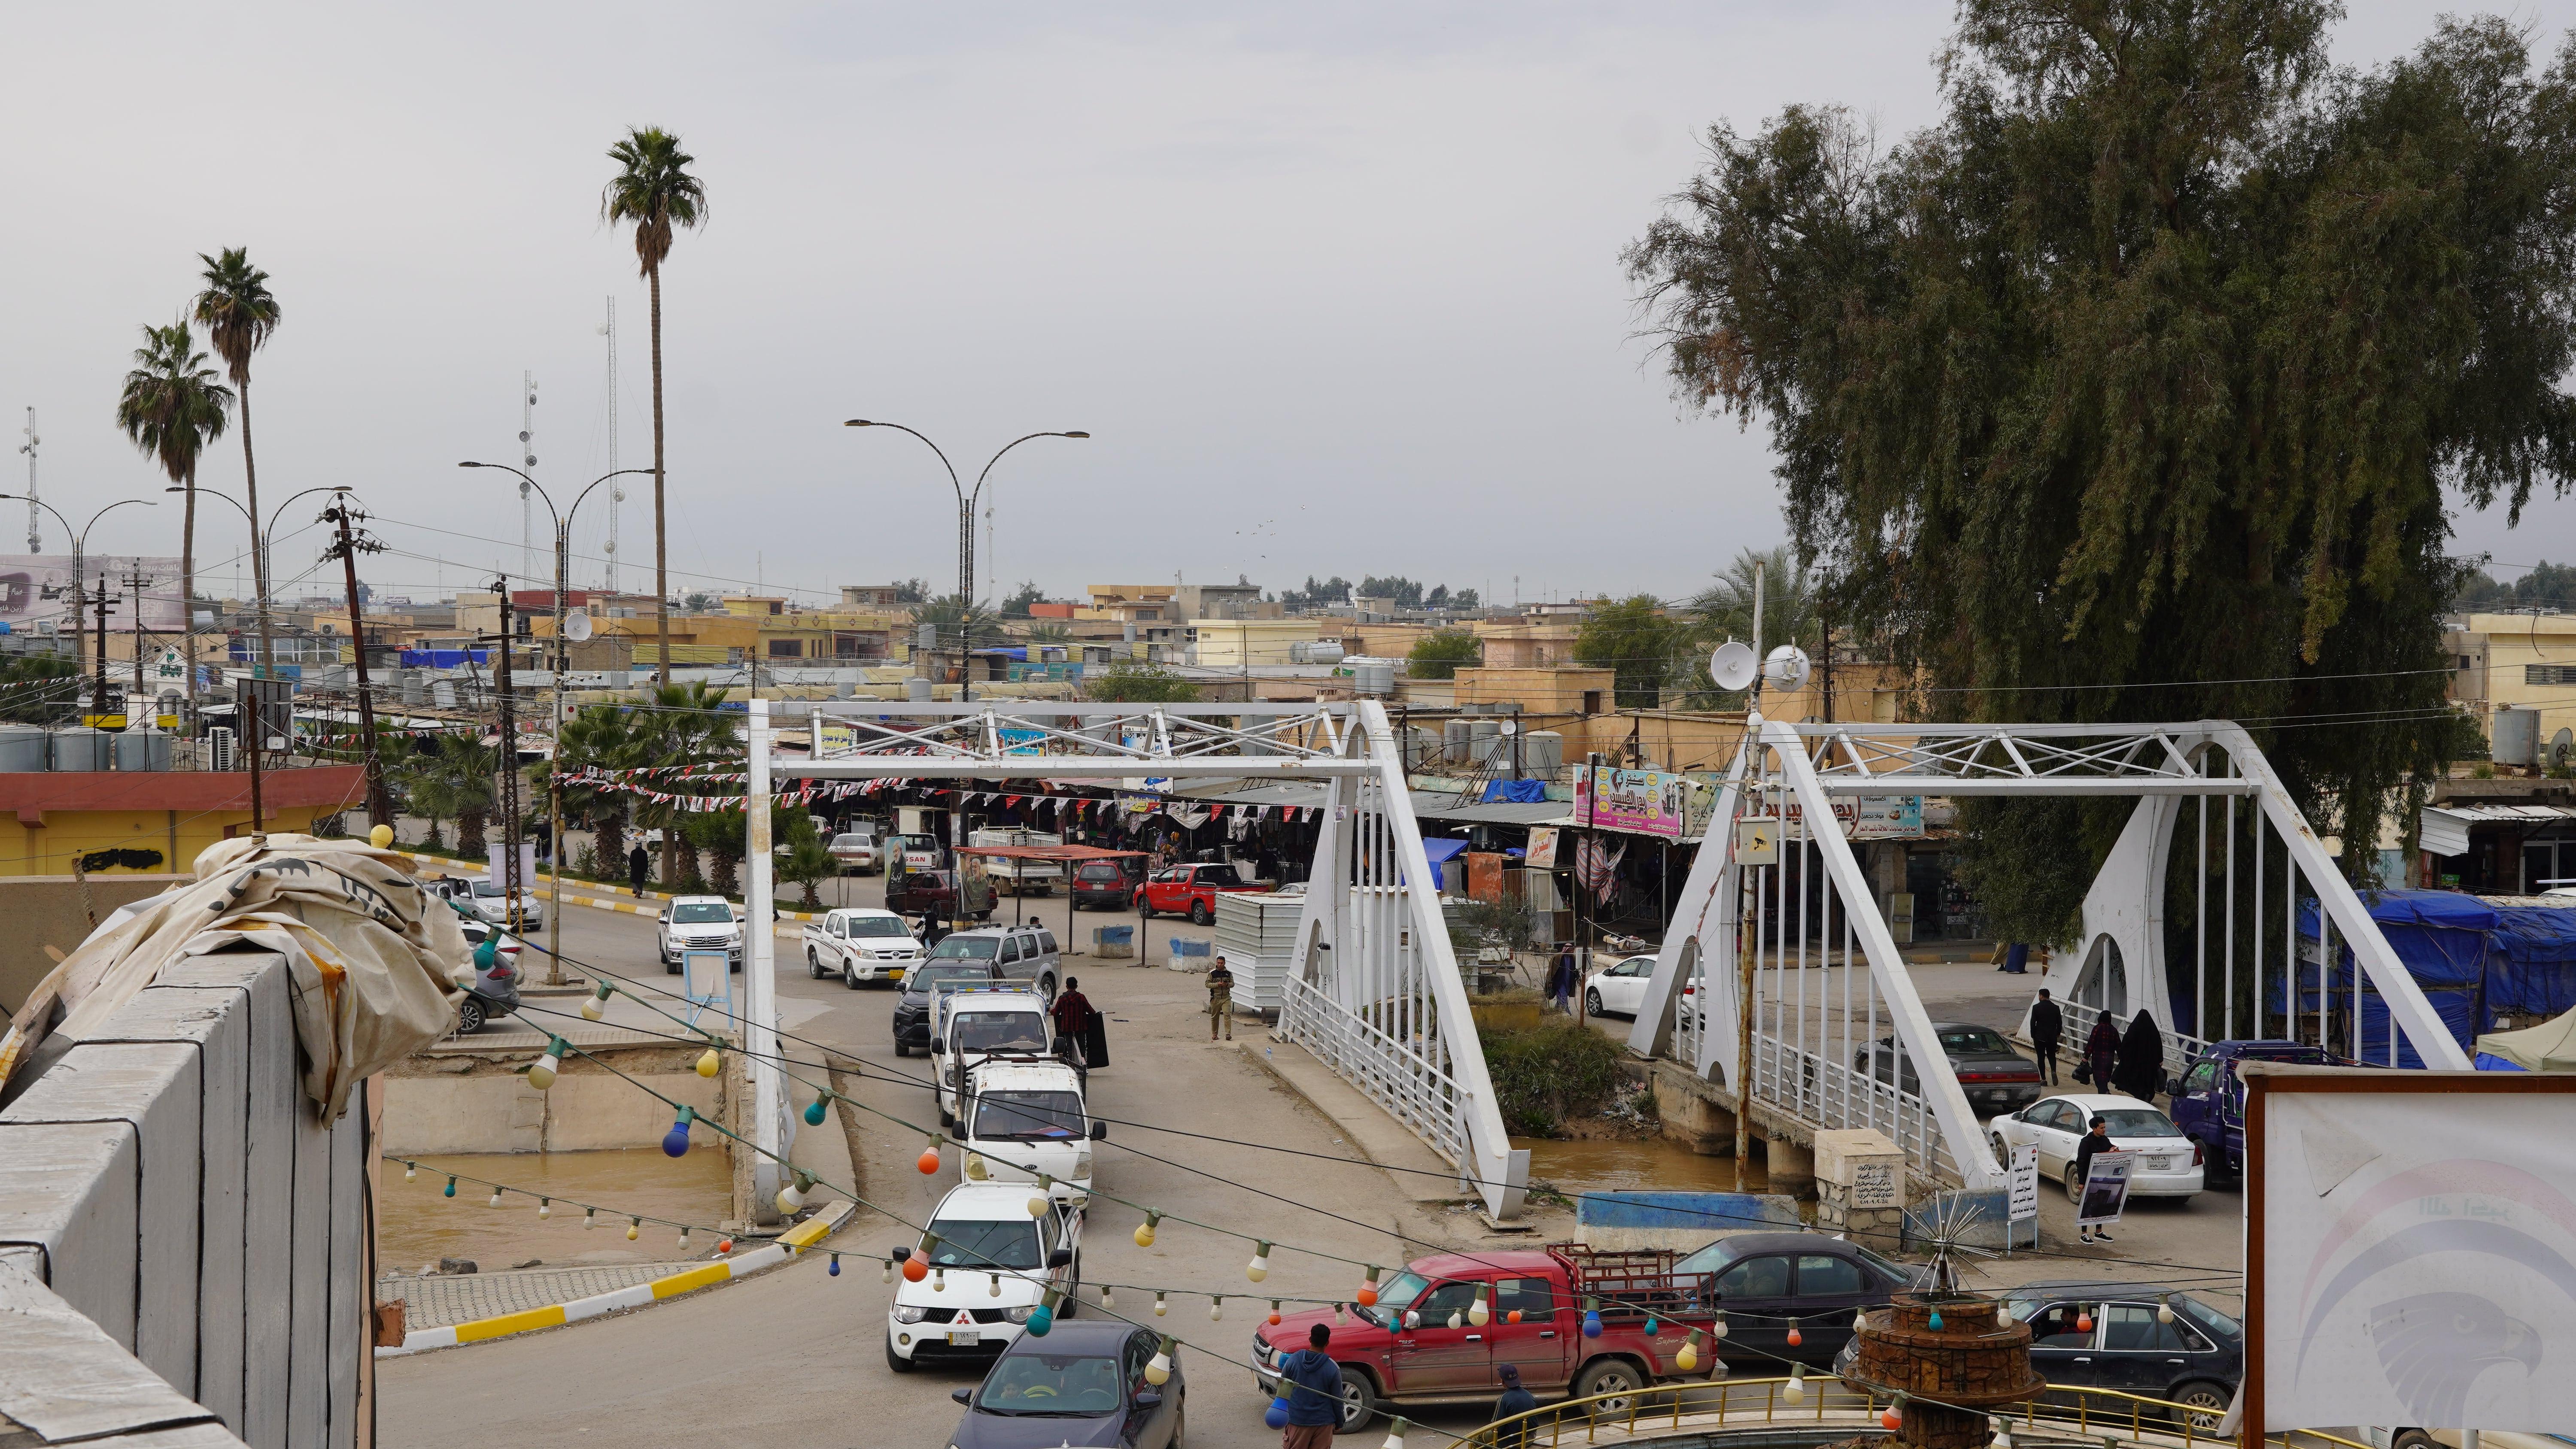 Medical Care in Iraq: A general view of the bridge in Hawija’s city centre.